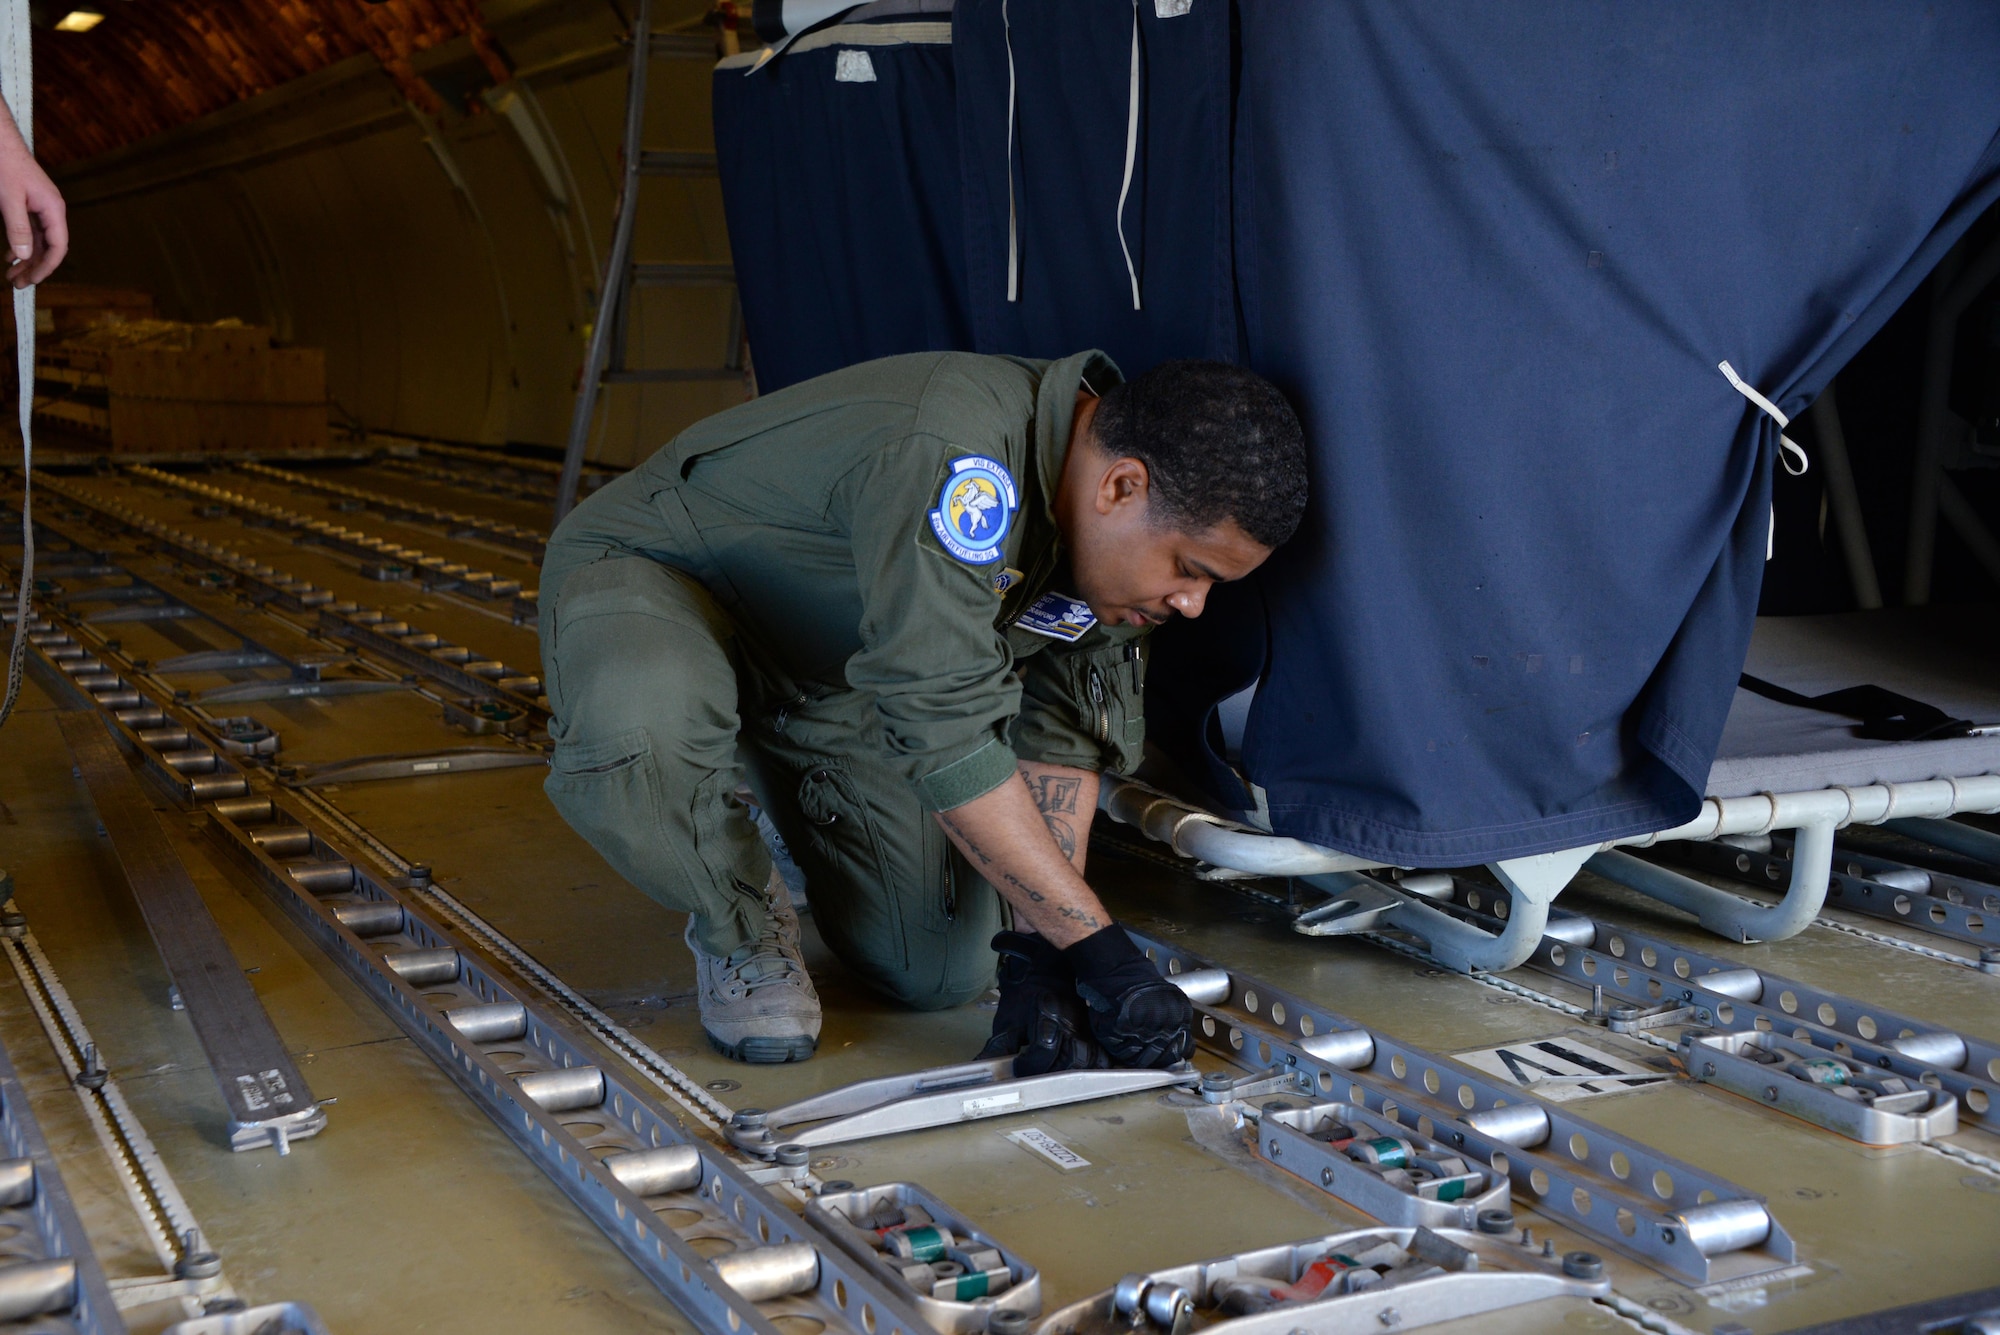 Tech. Sgt. Lee Crawford, 6th Air Refueling Squadron, configures the floor of a KC-10 Extender prior to loading operations at Travis Air Force Base, Calif., June 17, 2017. Crawford helped load more than 15,000 pounds of cargo prior to a flight to Joint Base Pearl Harbor-Hickam, Hawaii. (U.S. Air Force photo by Tech. Sgt. James Hodgman)